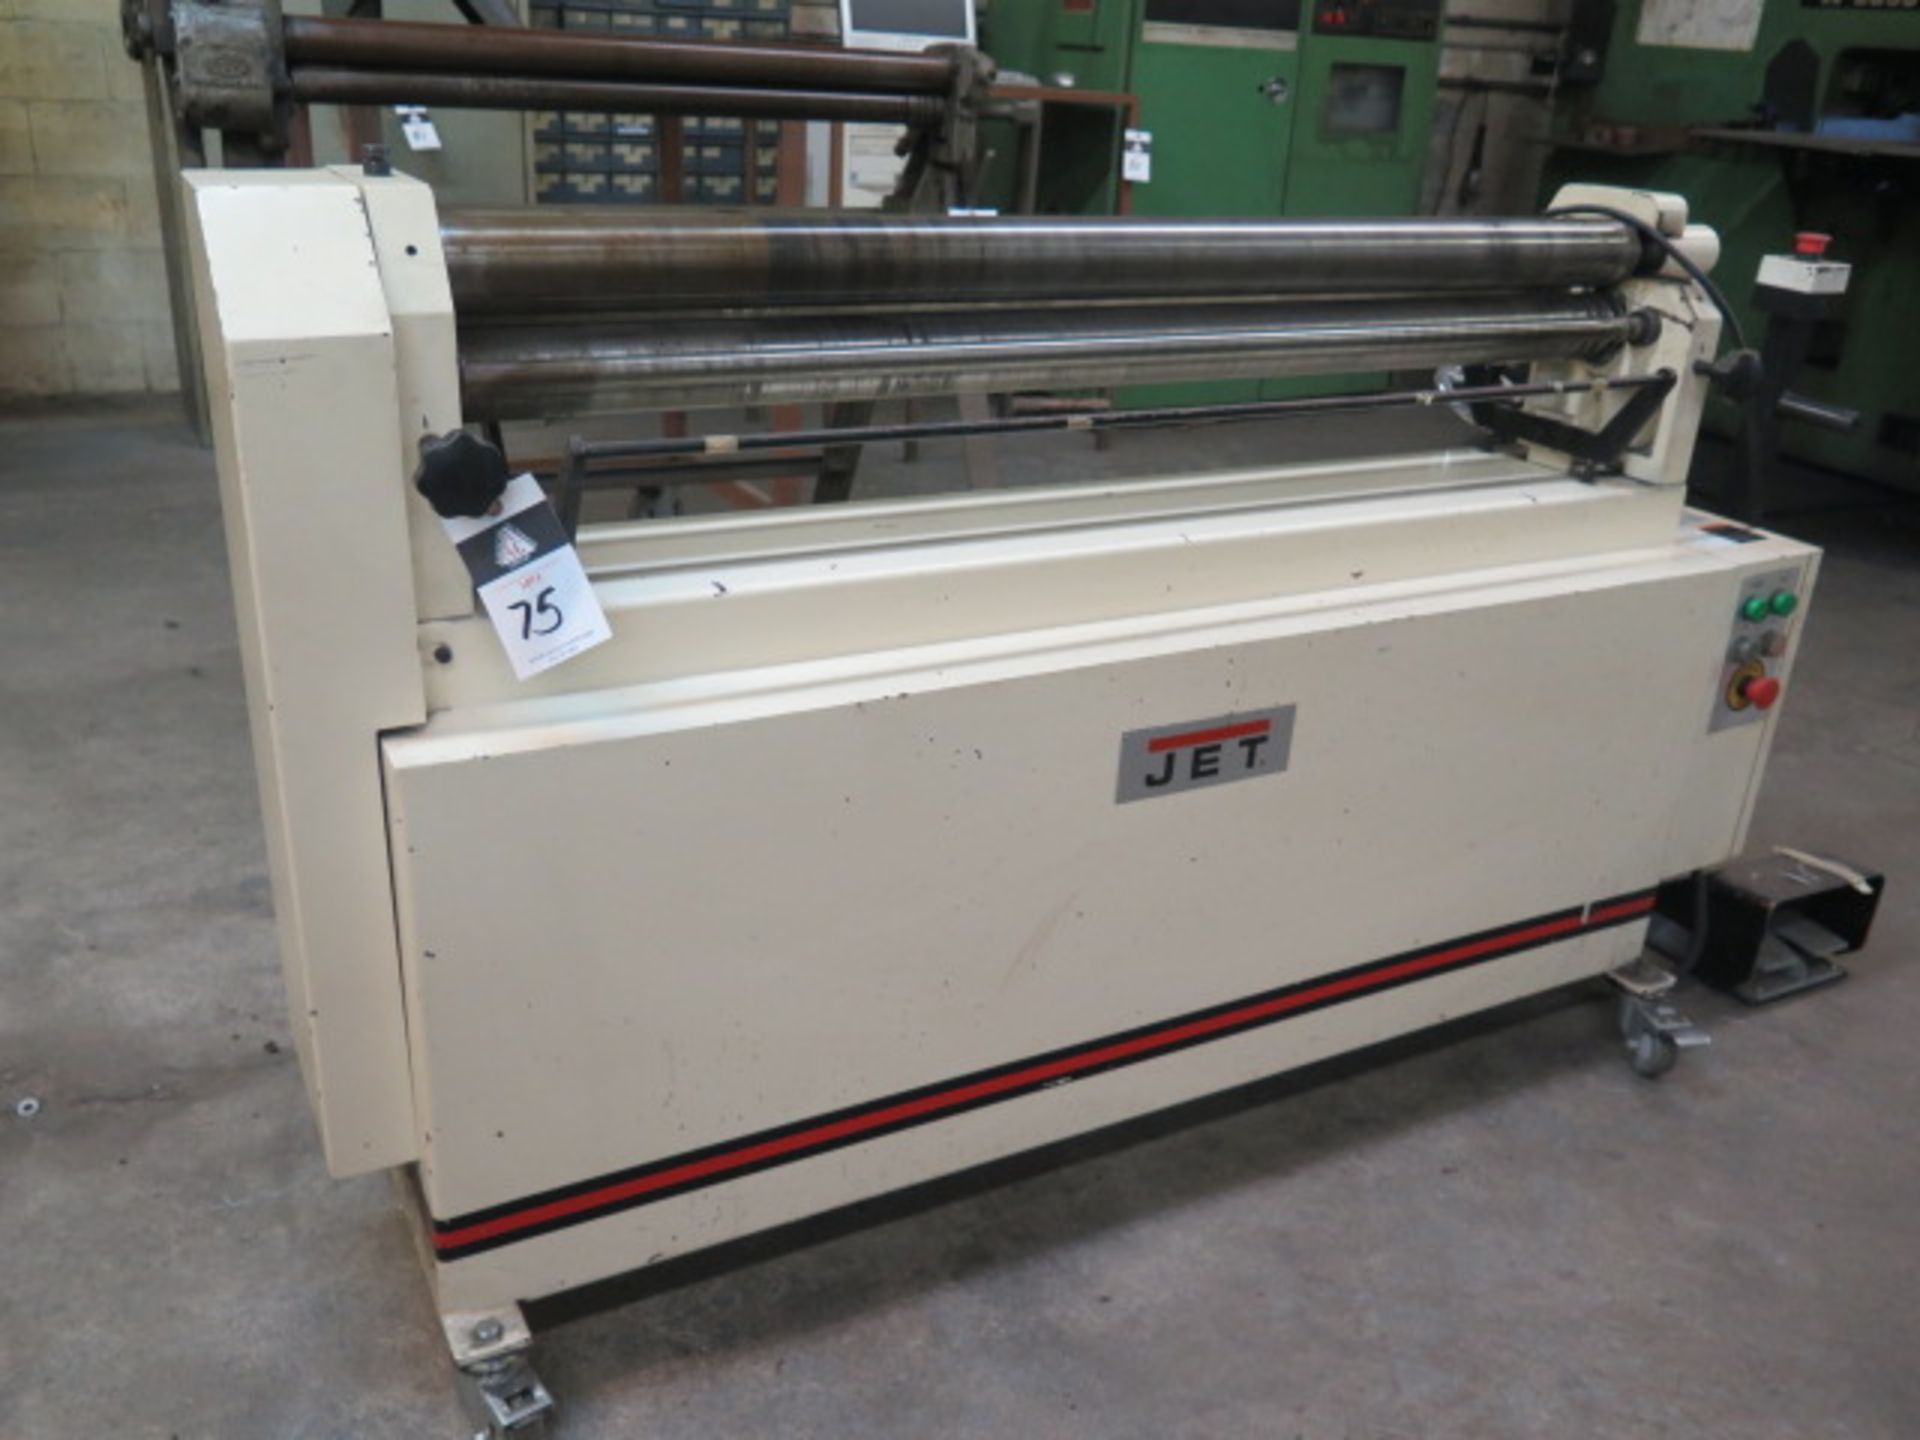 Jet ESR-1650-3T 51” Power Roll s/n 15030013 w/ 3” Rolls (SOLD AS-IS - NO WARRANTY) - Image 3 of 12